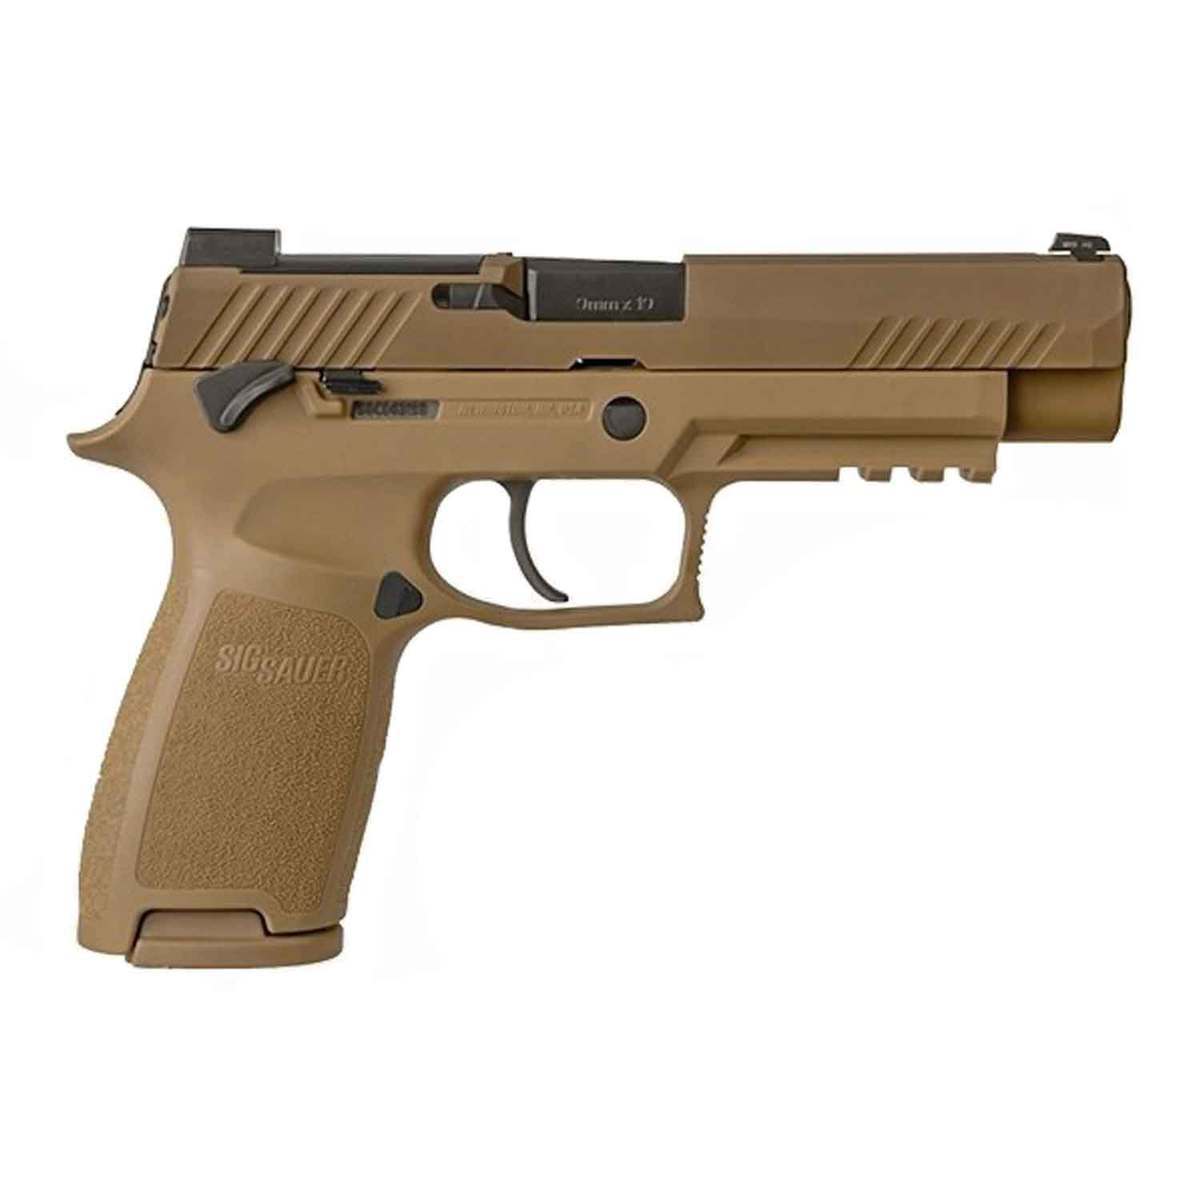 sig sauer p320 m17 manual safety 9mm luger 47in coyote tan pistol 171 rounds 1515268 1